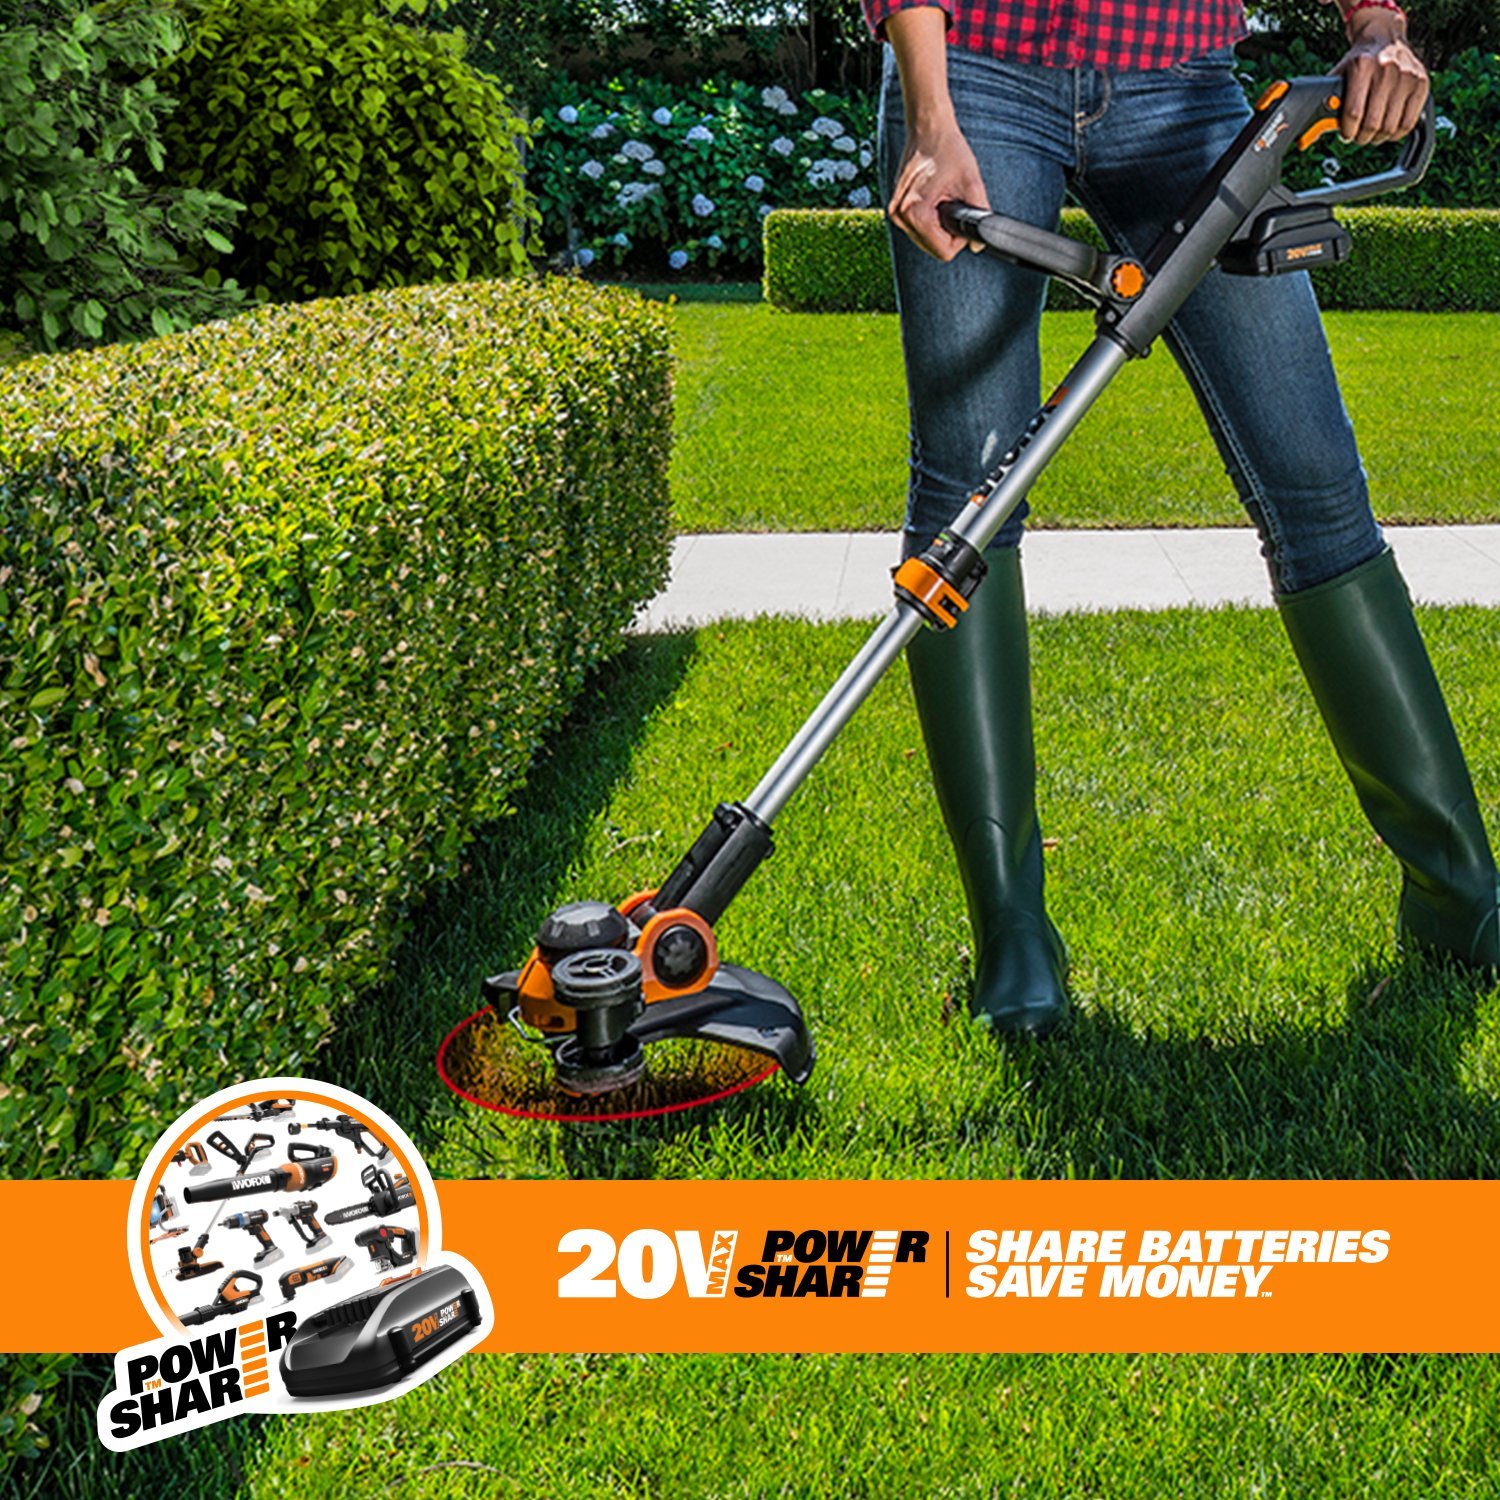 WORX WG163 GT 3.0 20V Cordless Grass Trimmer/Edger with Command Feed | Best Gutter Cleaning Tool